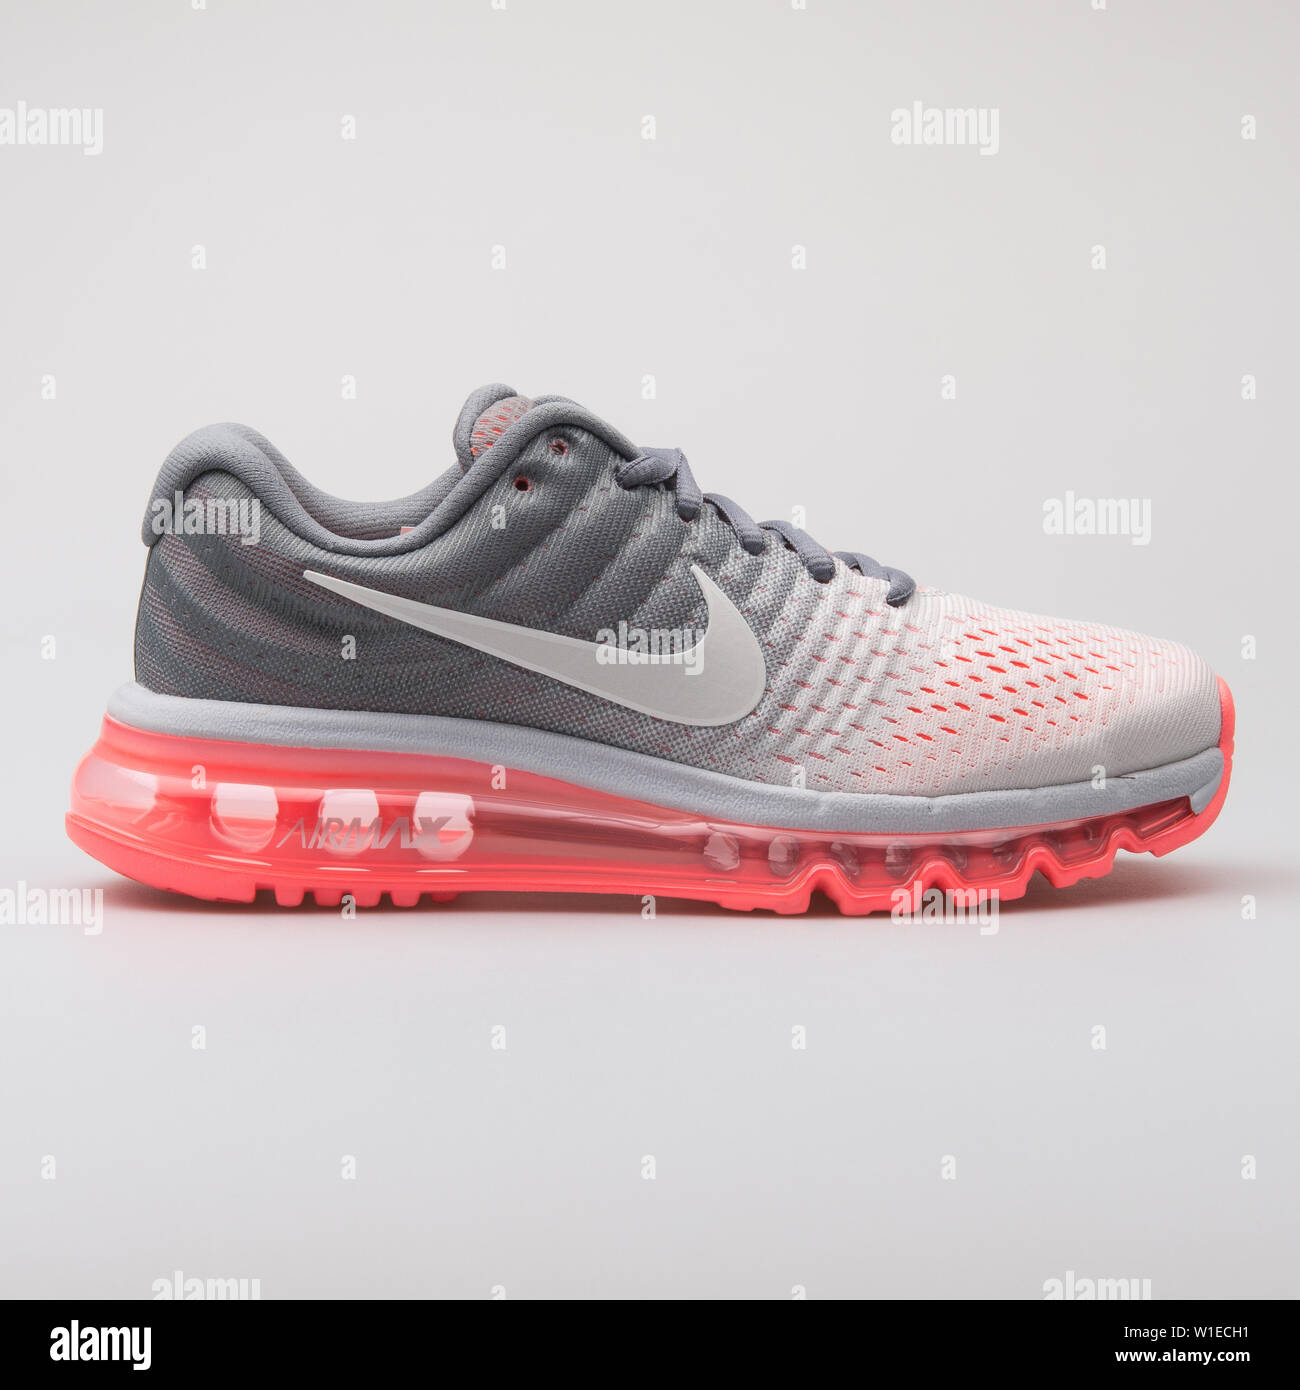 VIENNA, AUSTRIA - AUGUST 7, 2017: Nike Air Max 2017 grey and pink sneaker  on white background Stock Photo - Alamy